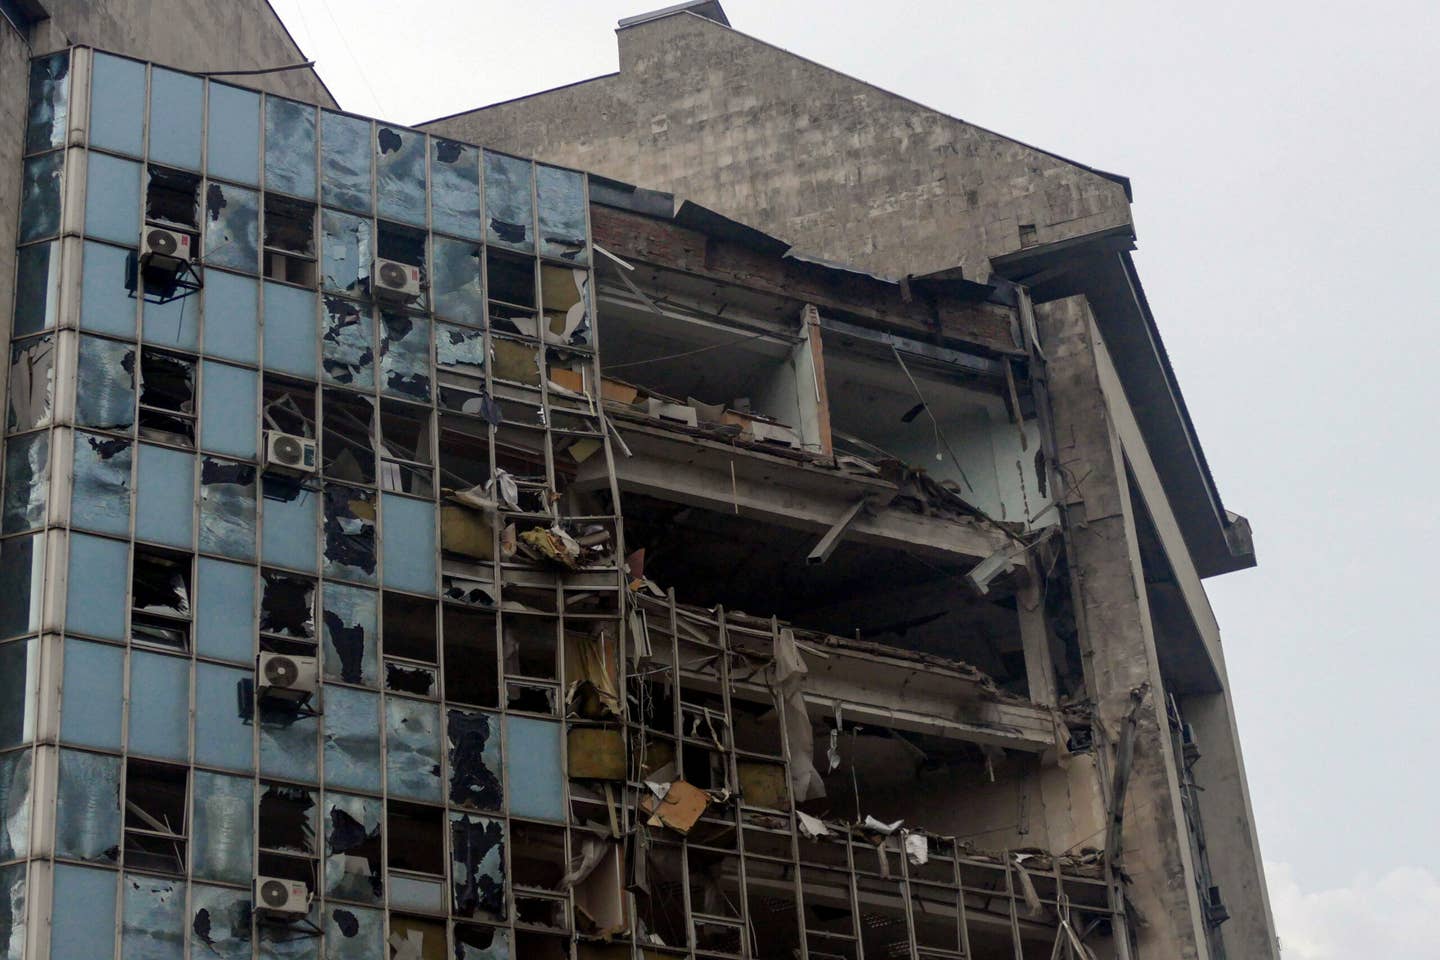 The Ukrainian Danube Shipping Company building shows damage caused by the Russian drone attack on the port infrastructure of Izmail situated on the Danube River Wednesday night, August 2, 2023, in Izmail, Odesa region, southern Ukraine. <em>Yulii Zozulia/Ukrinform/Future Publishing via Getty Images</em>